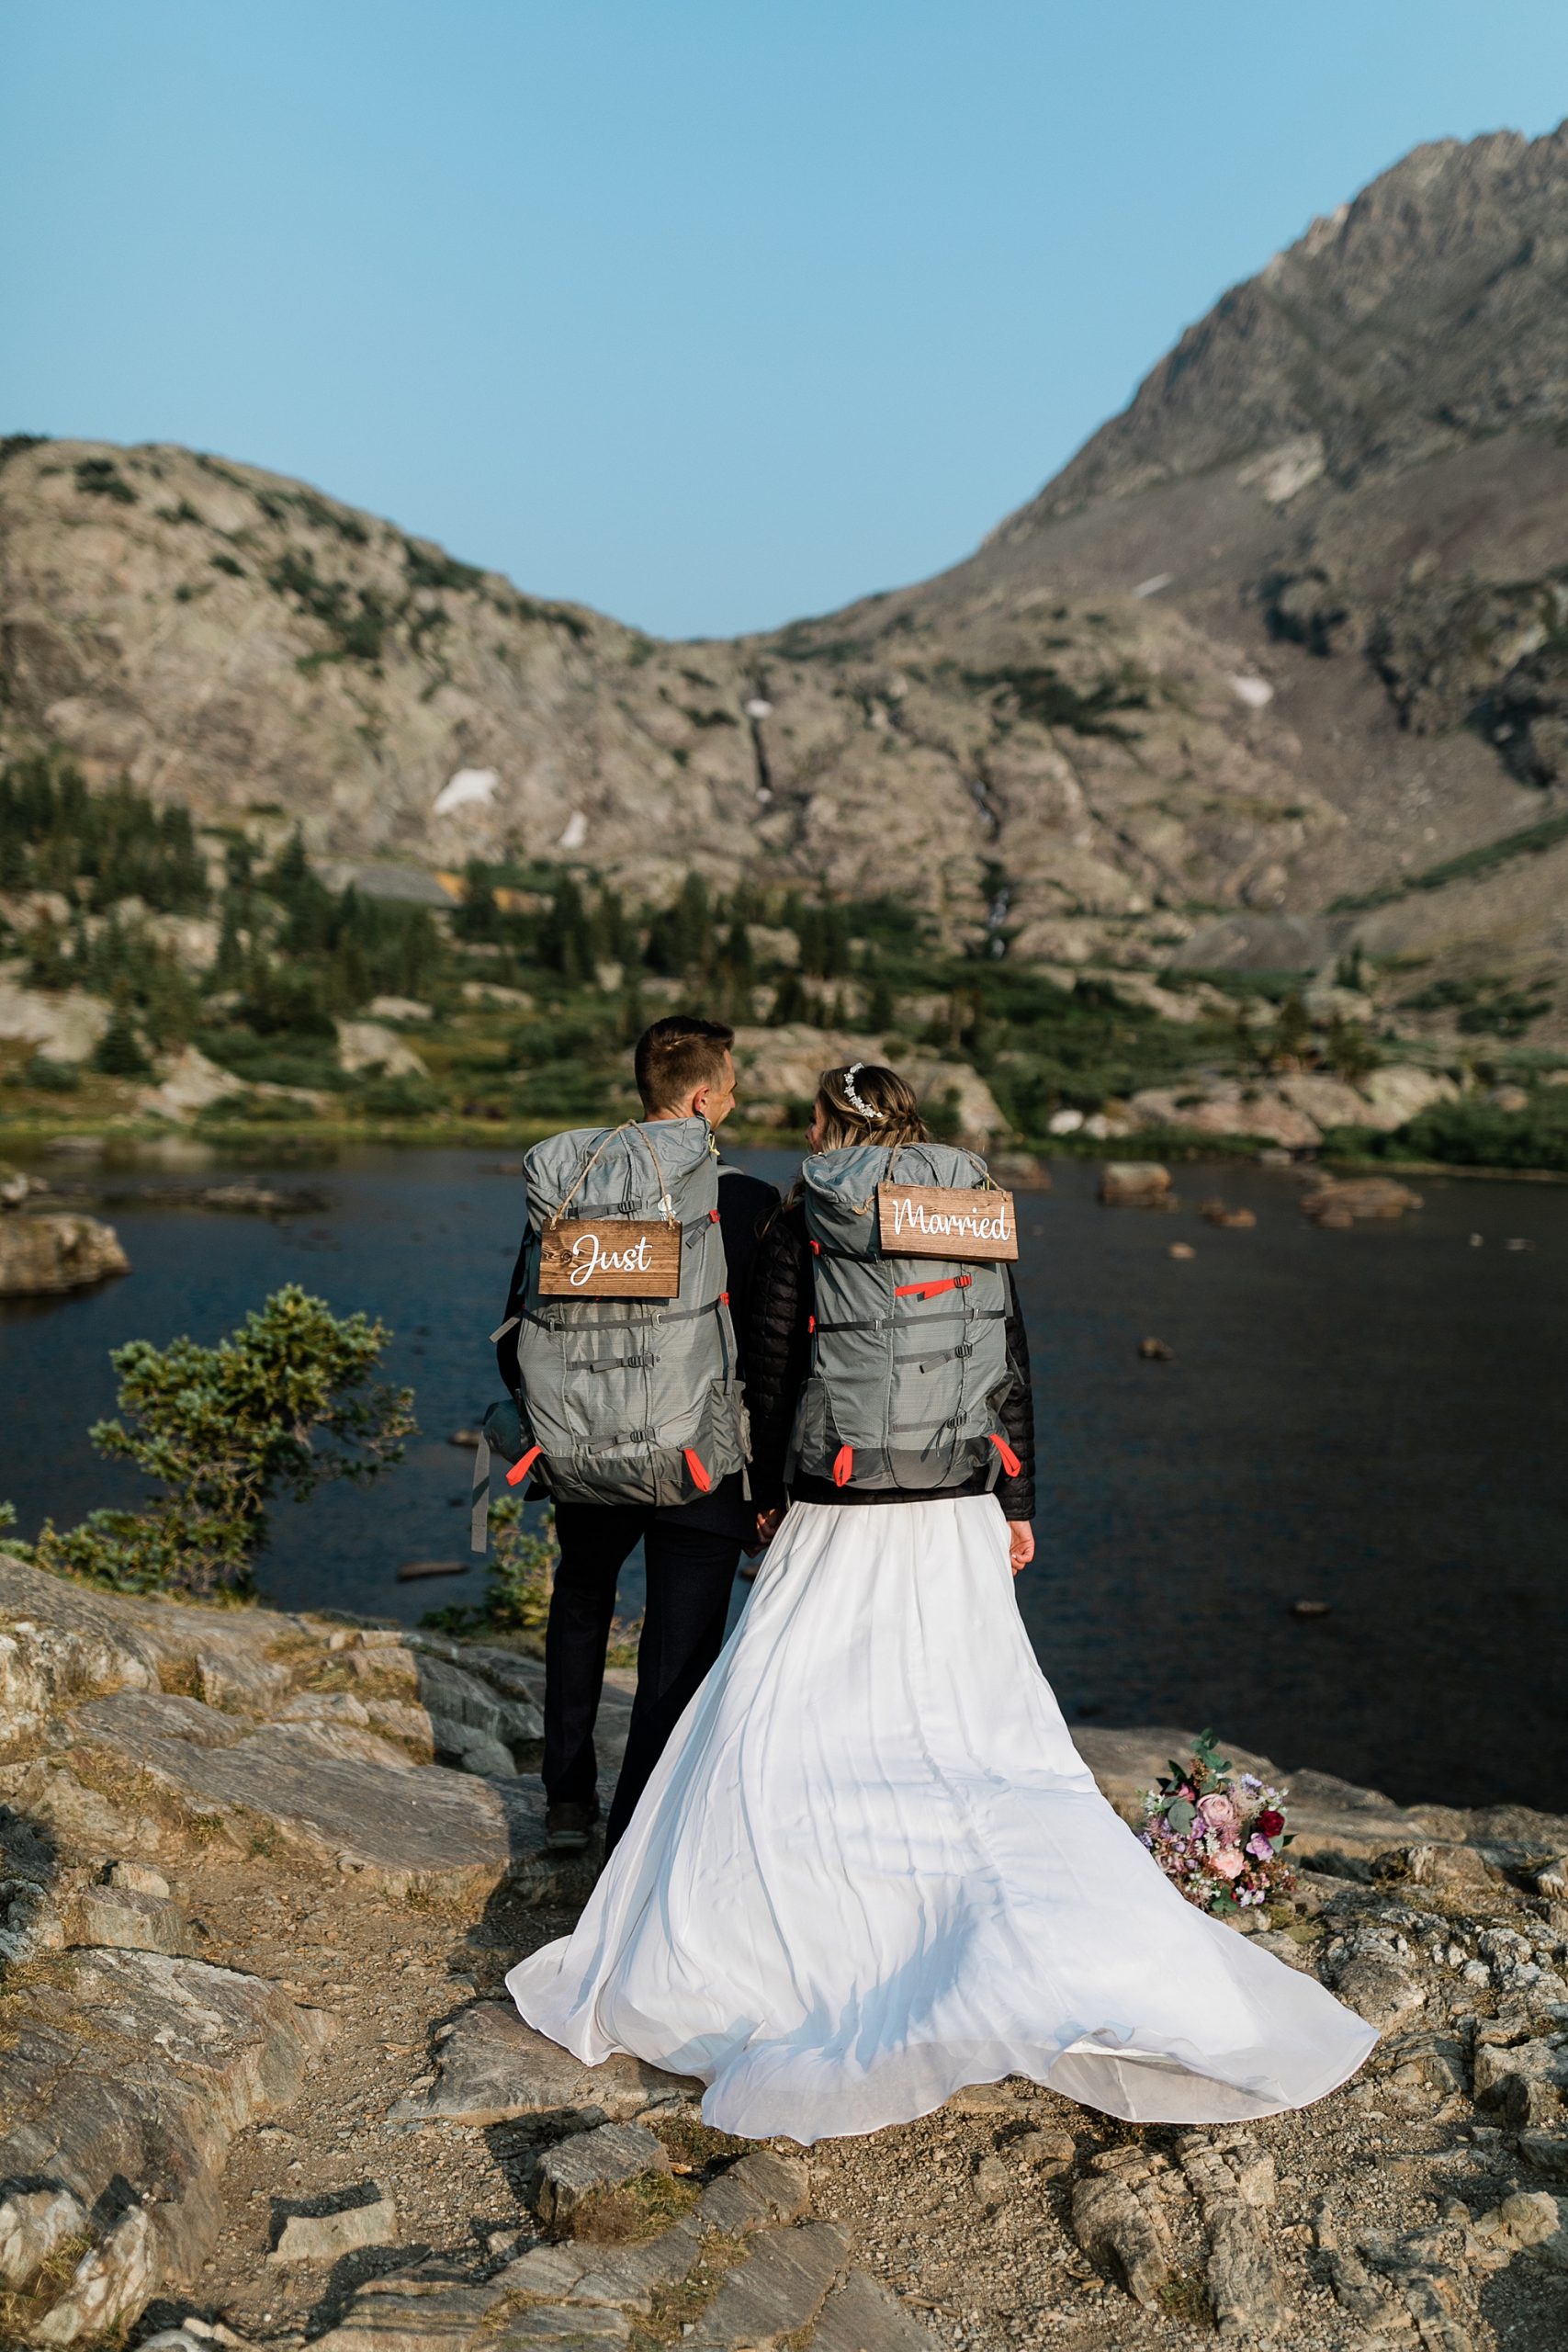 just married signs on back packs after hiking elopement in colorado